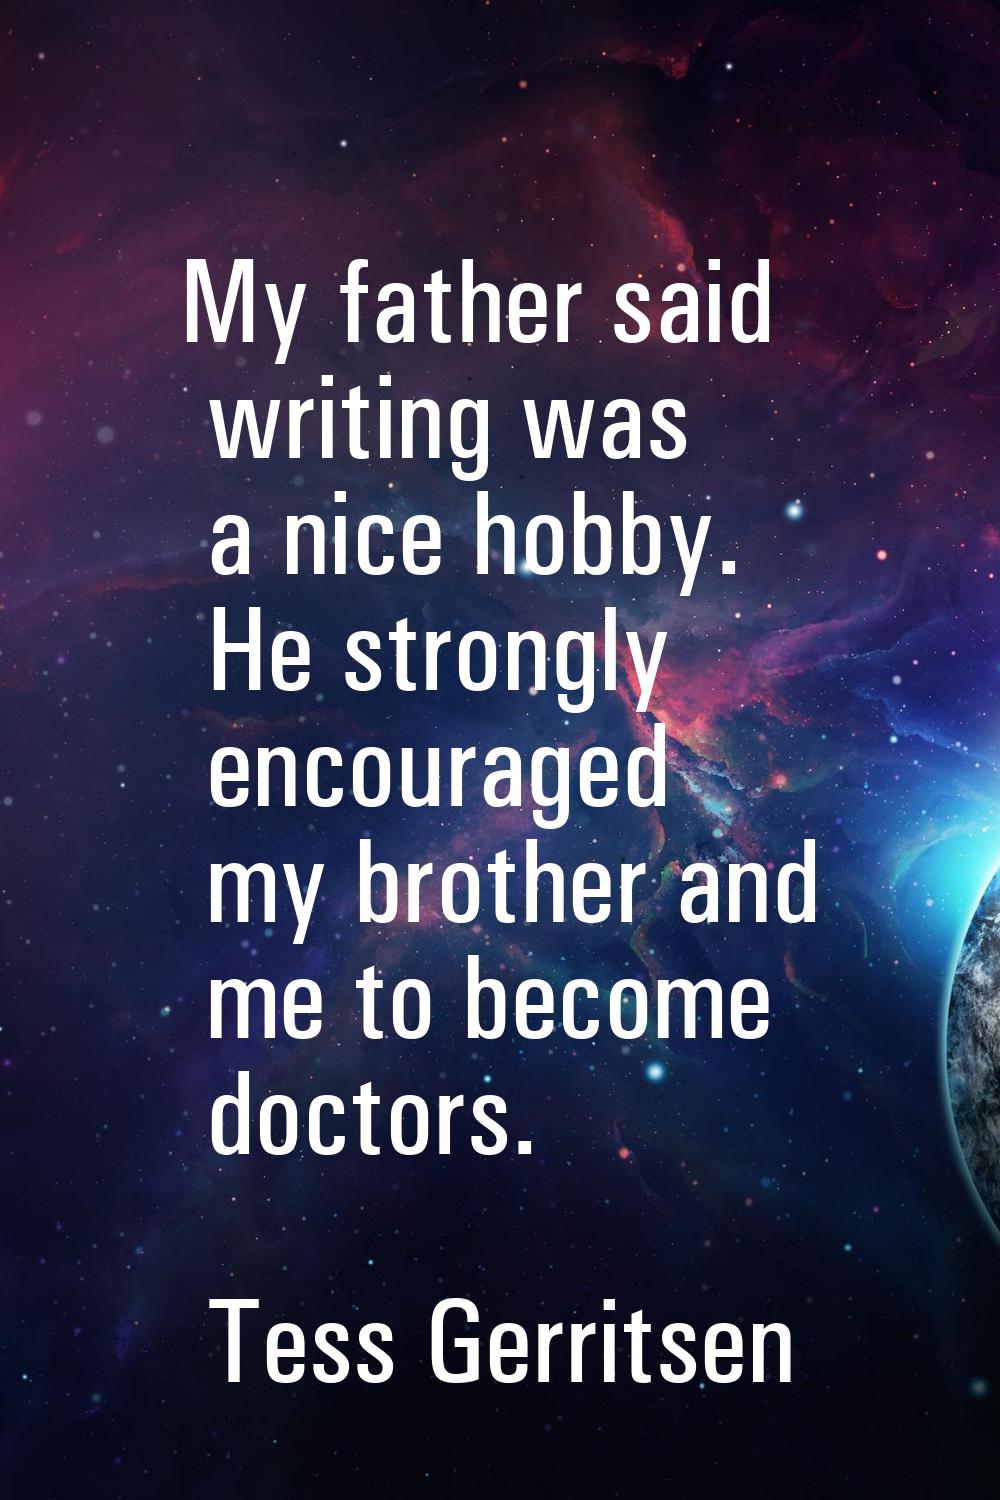 My father said writing was a nice hobby. He strongly encouraged my brother and me to become doctors